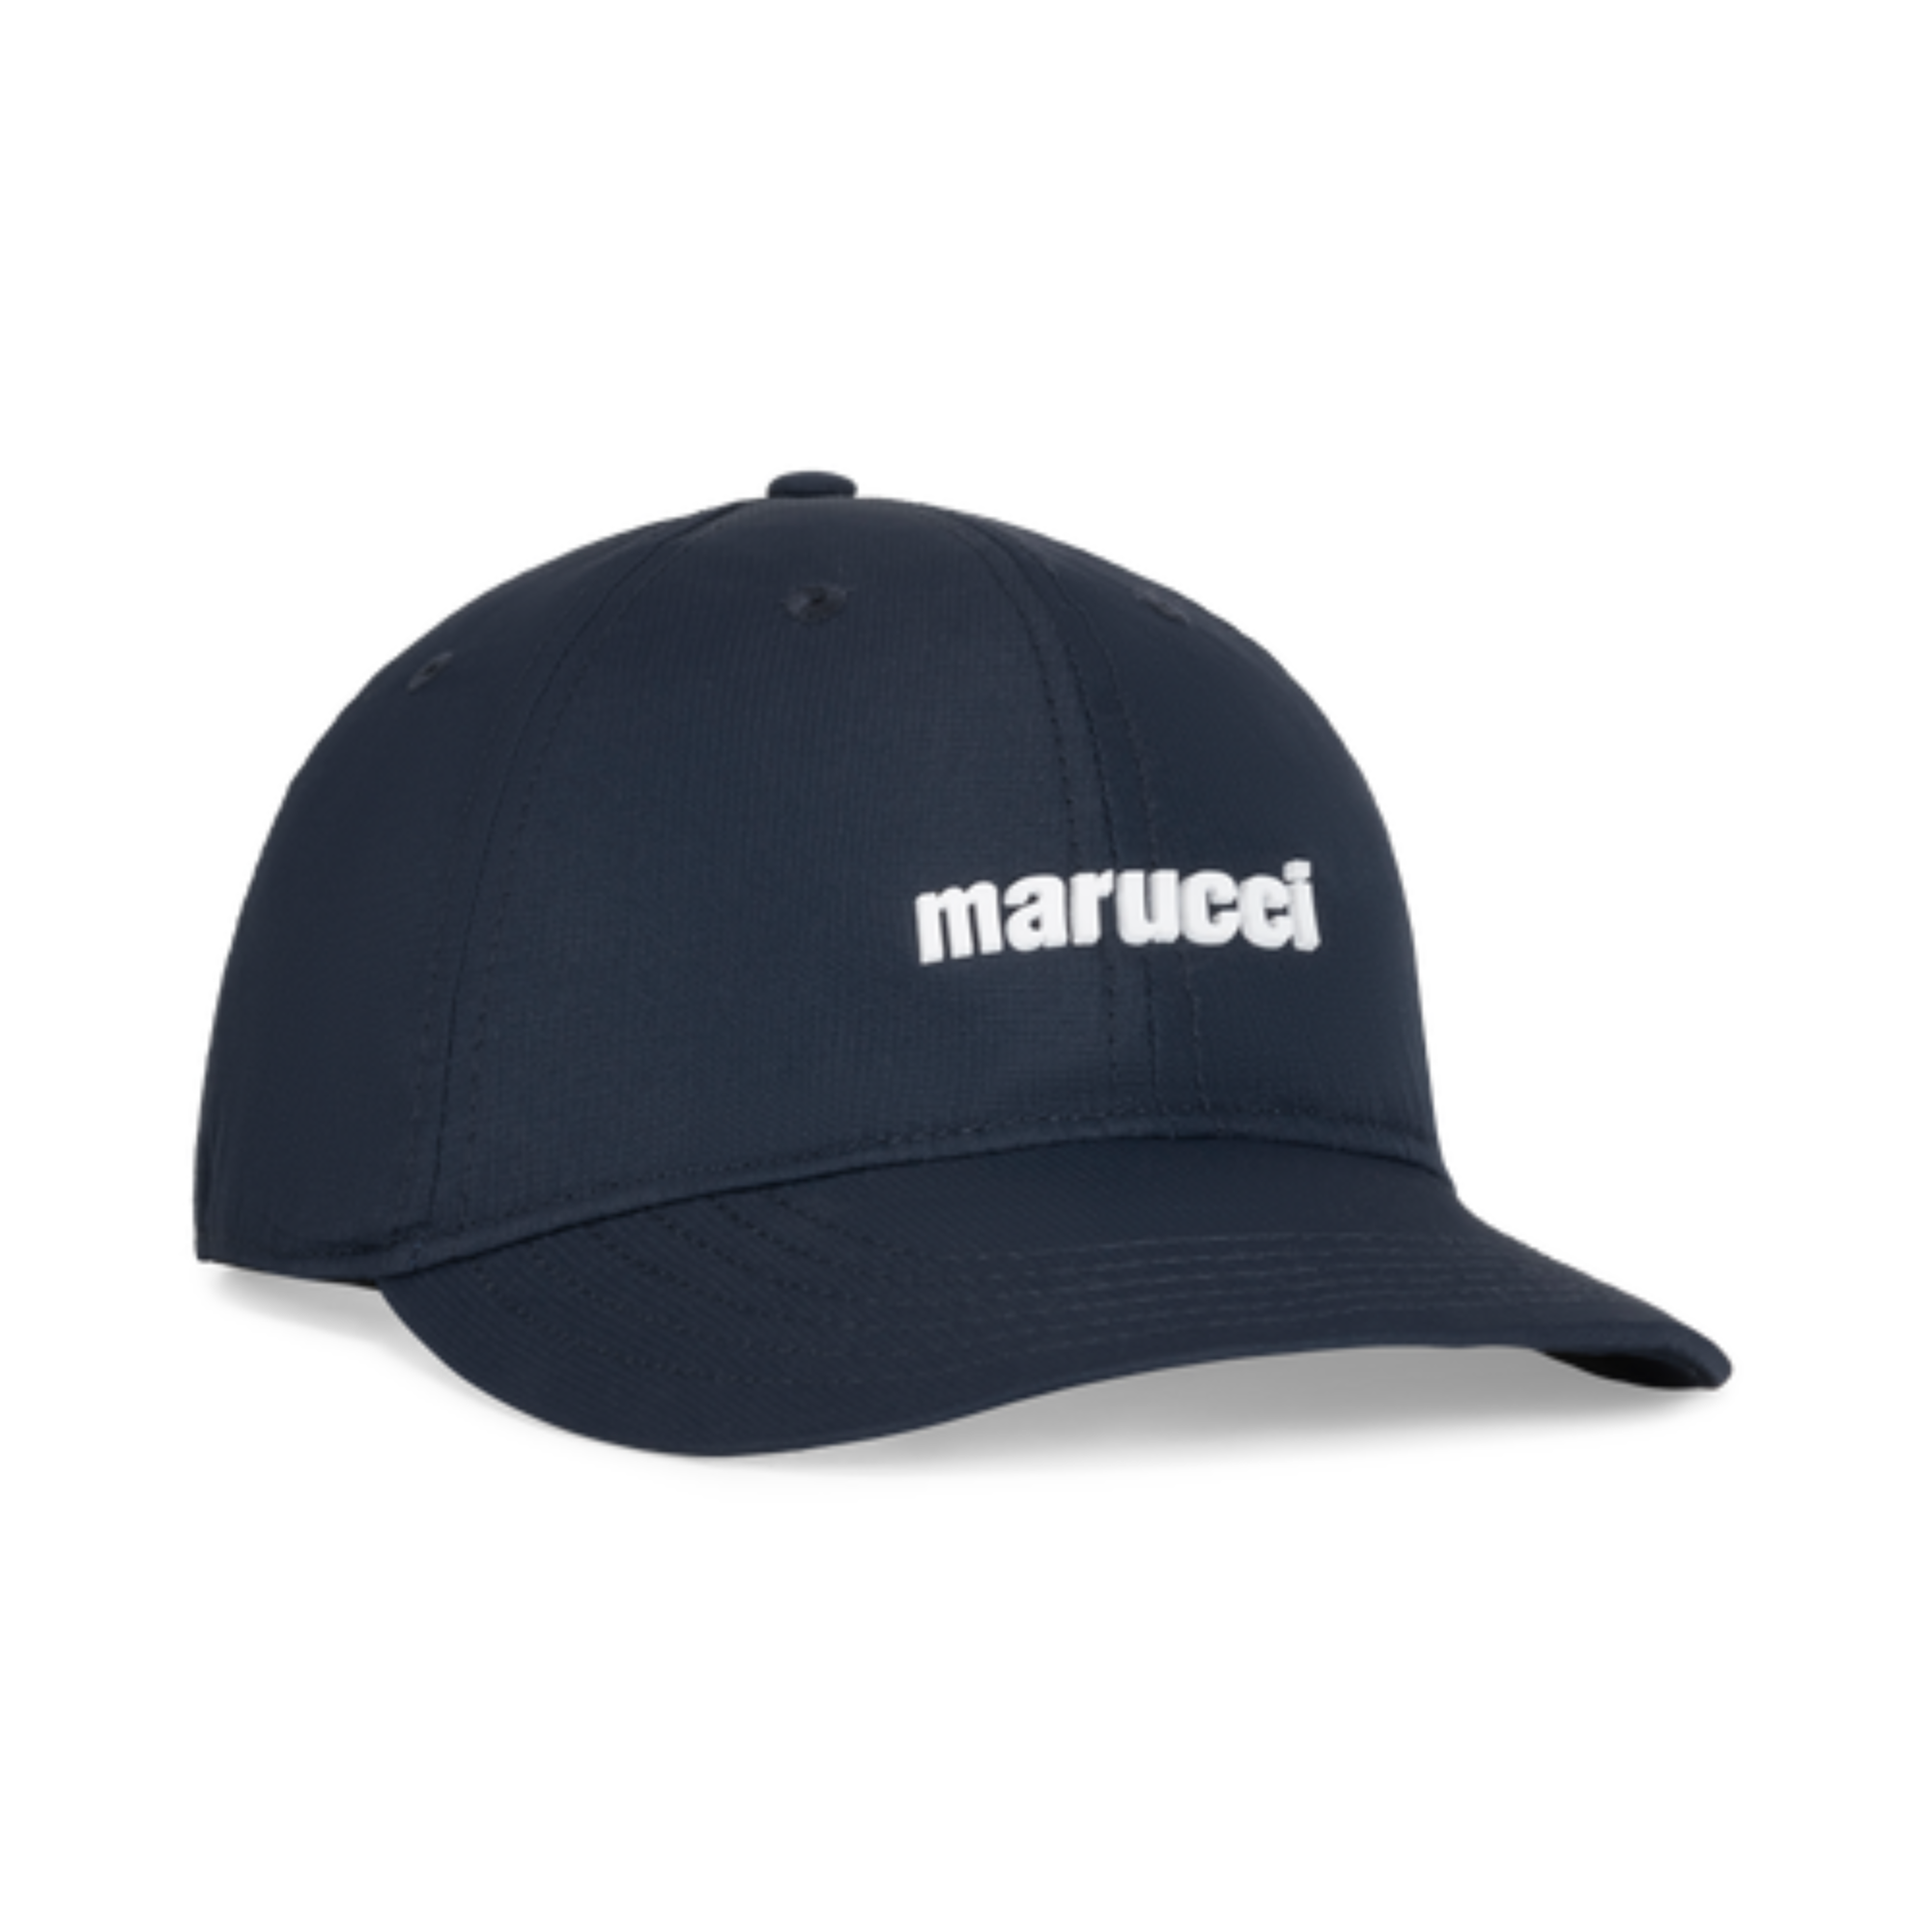 Marucci Adult Unstructured Performance Cap